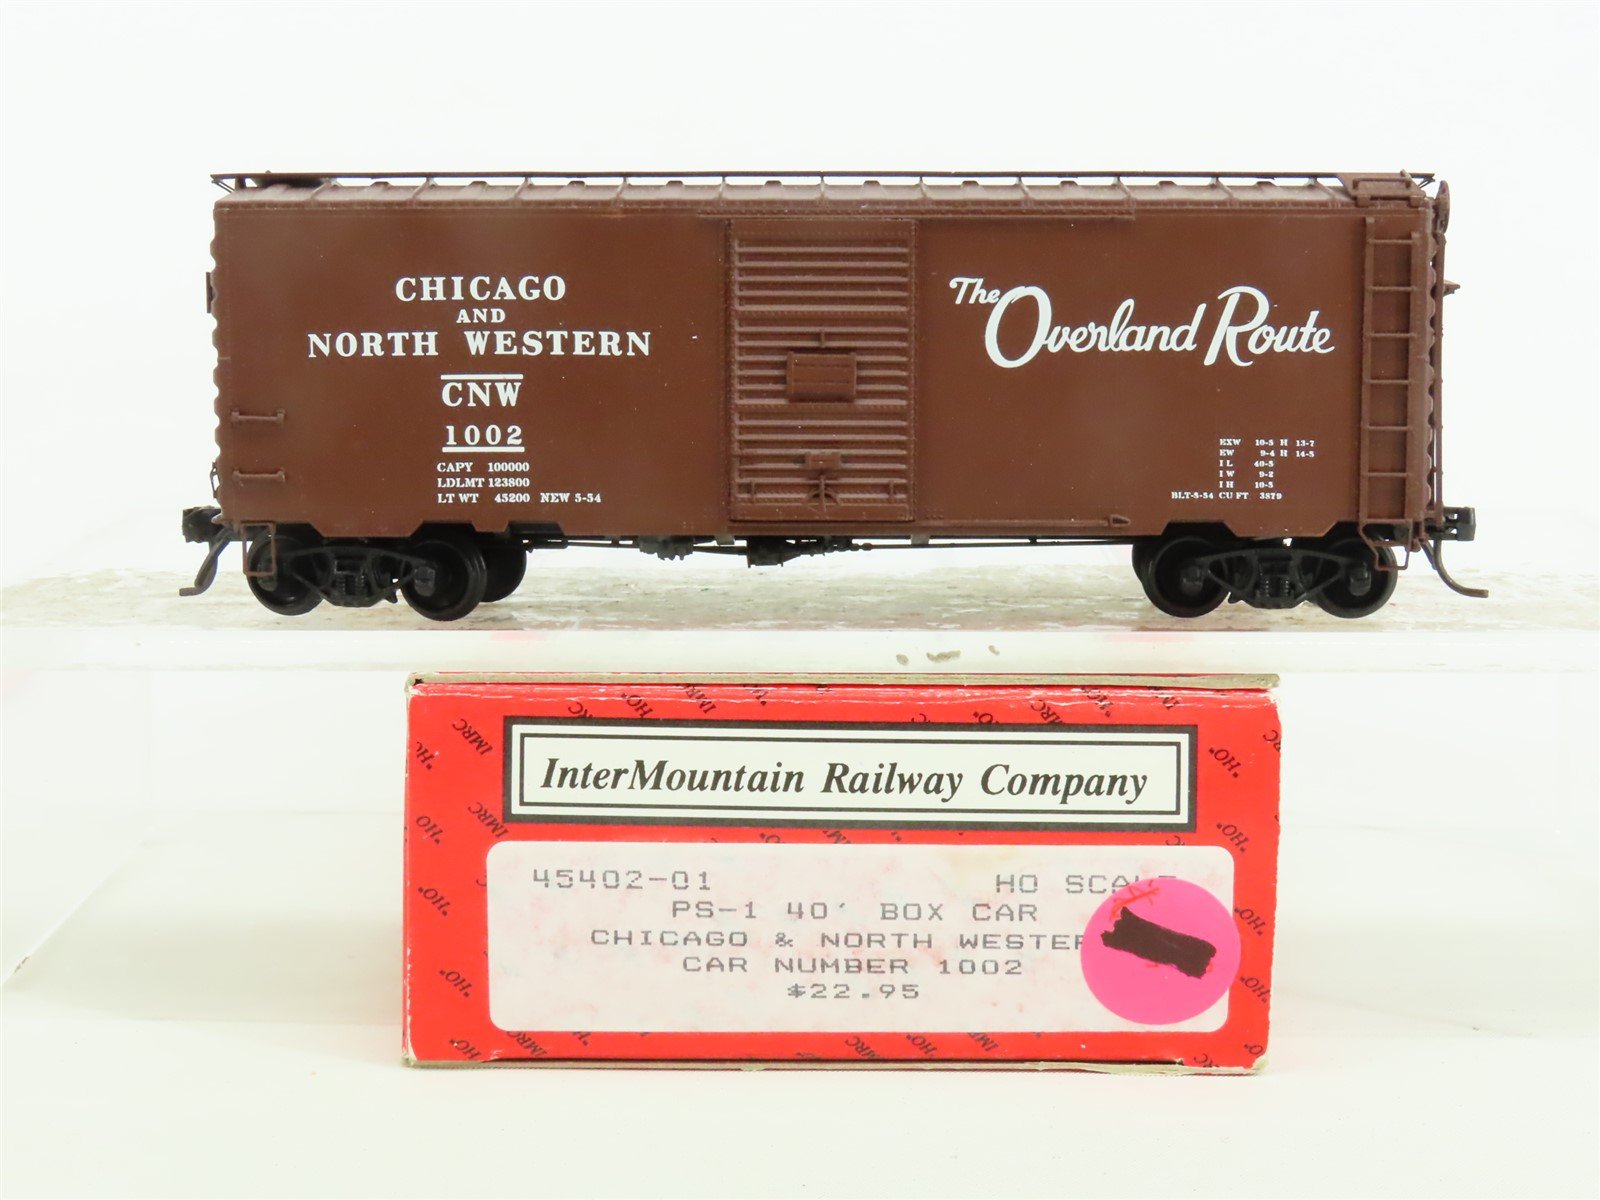 HO Scale InterMountain 45402-01 C&NW "The Overland Route" 40' Box Car #1002